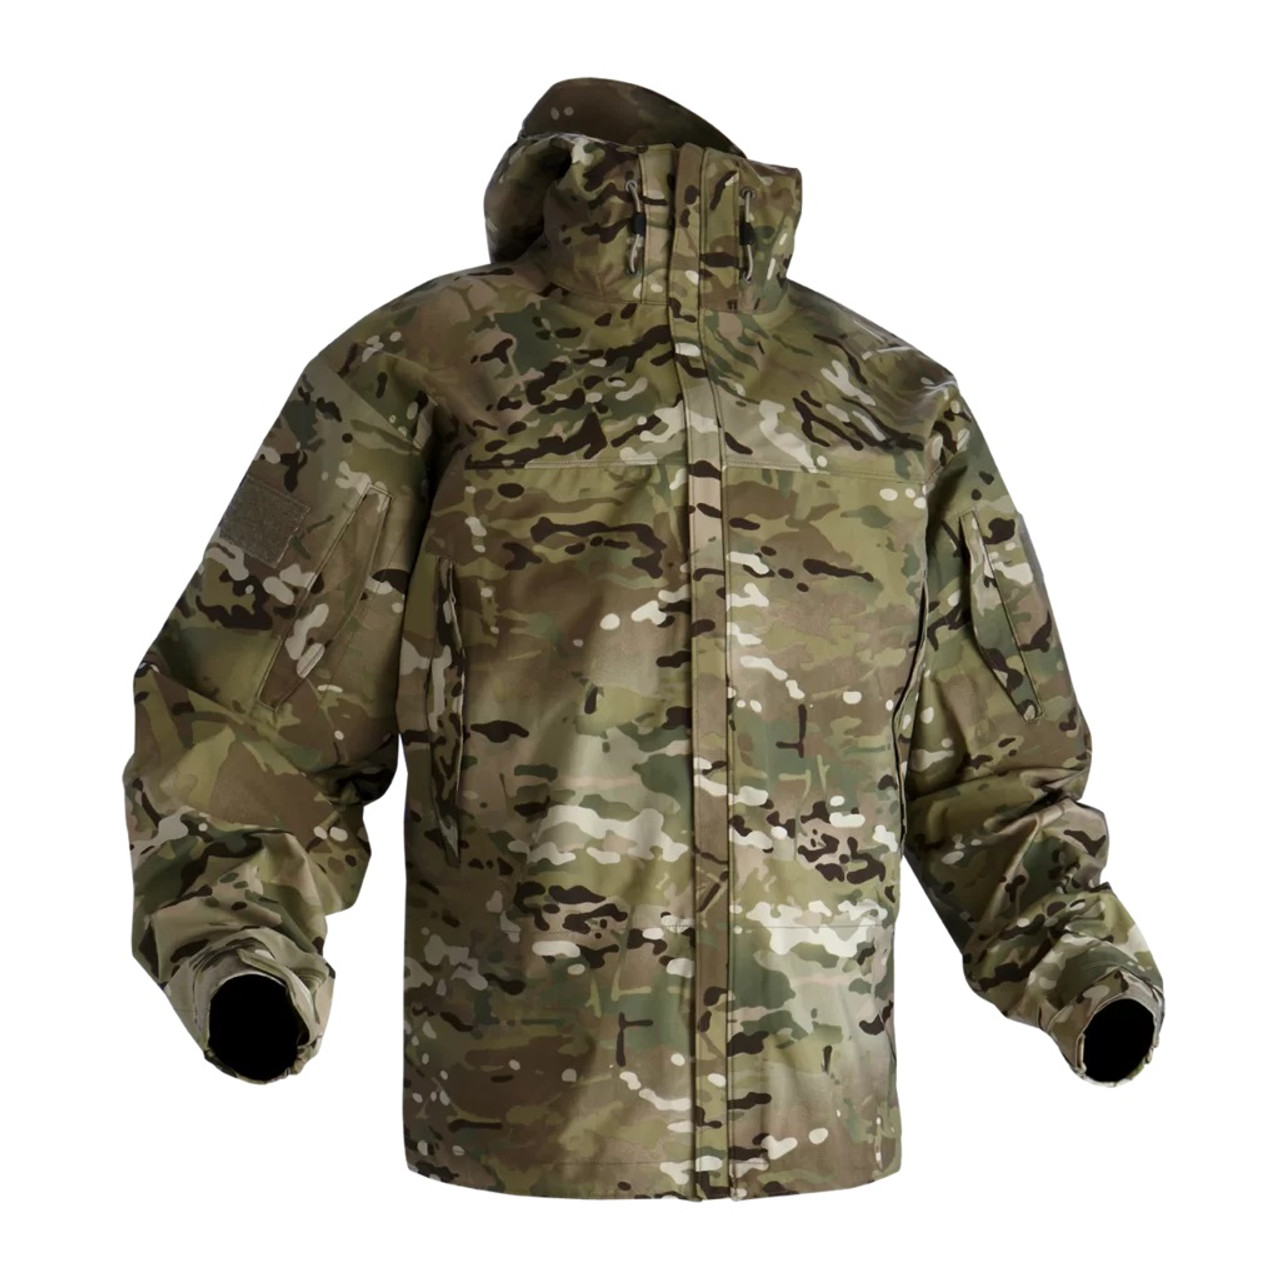 https://cdn11.bigcommerce.com/s-98f3d/images/stencil/1280x1280/products/4034/20996/Wild_Things_Hard_Shell_Jacket_S.O._1.0_3_Layer_Gore-tex_Multicam_USA1__41368.1642355650.jpg?c=2